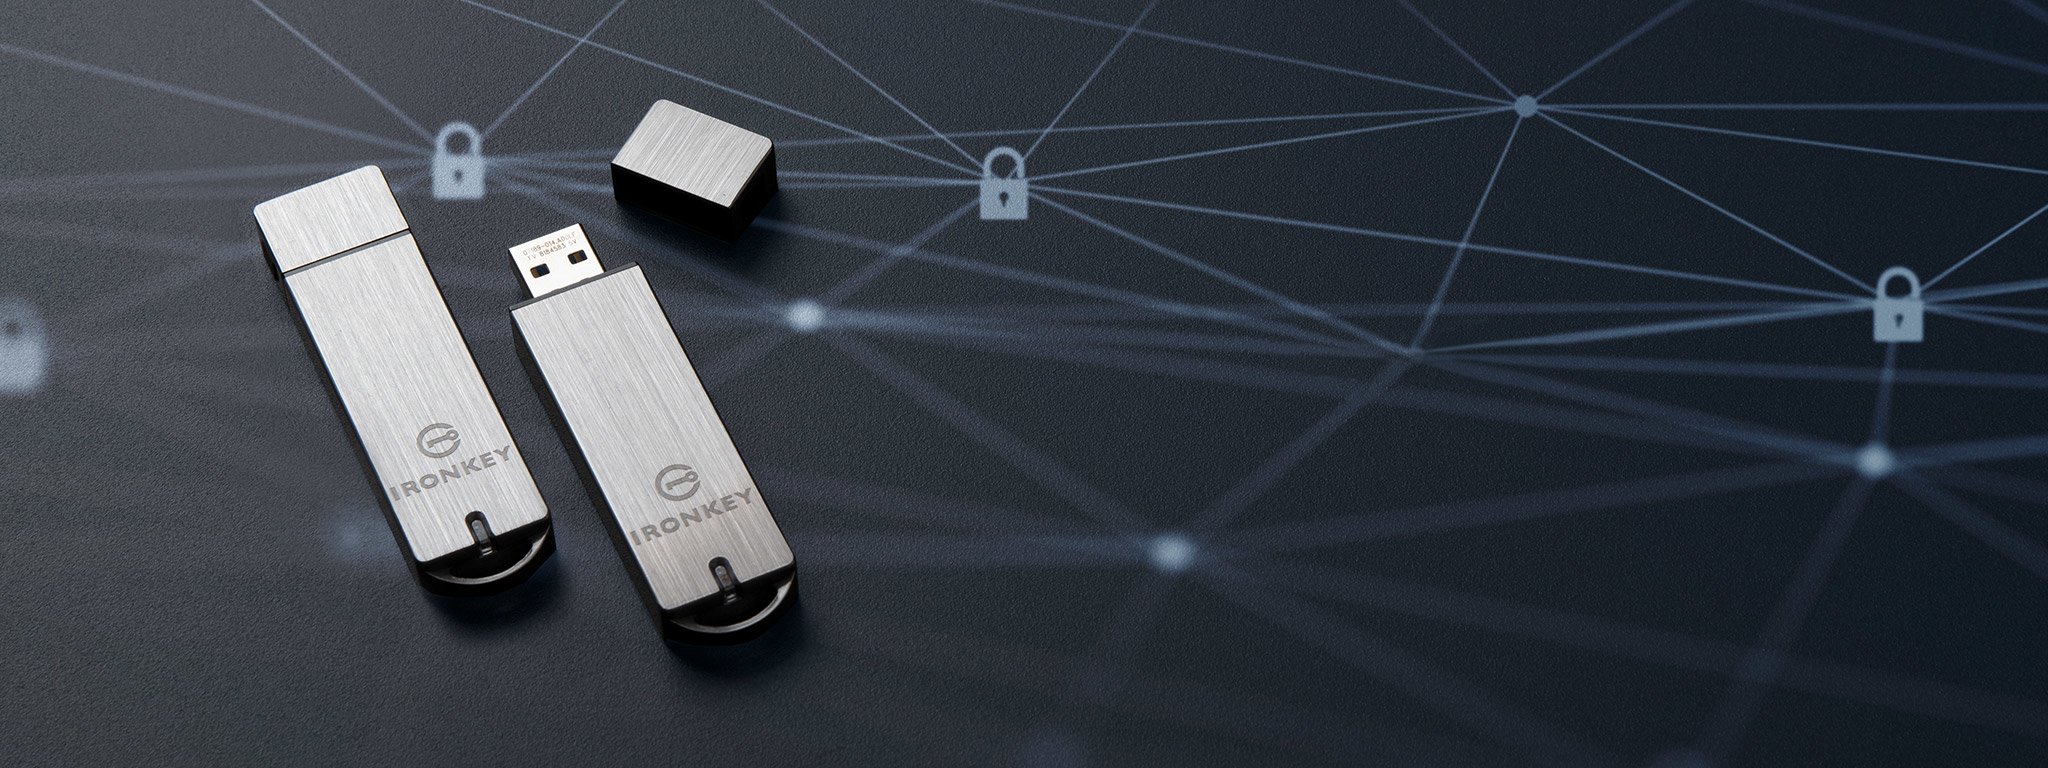 A pair of IronKey S1000 Encrypted USB flash drives sit on a black surface with lock icon graphics in white